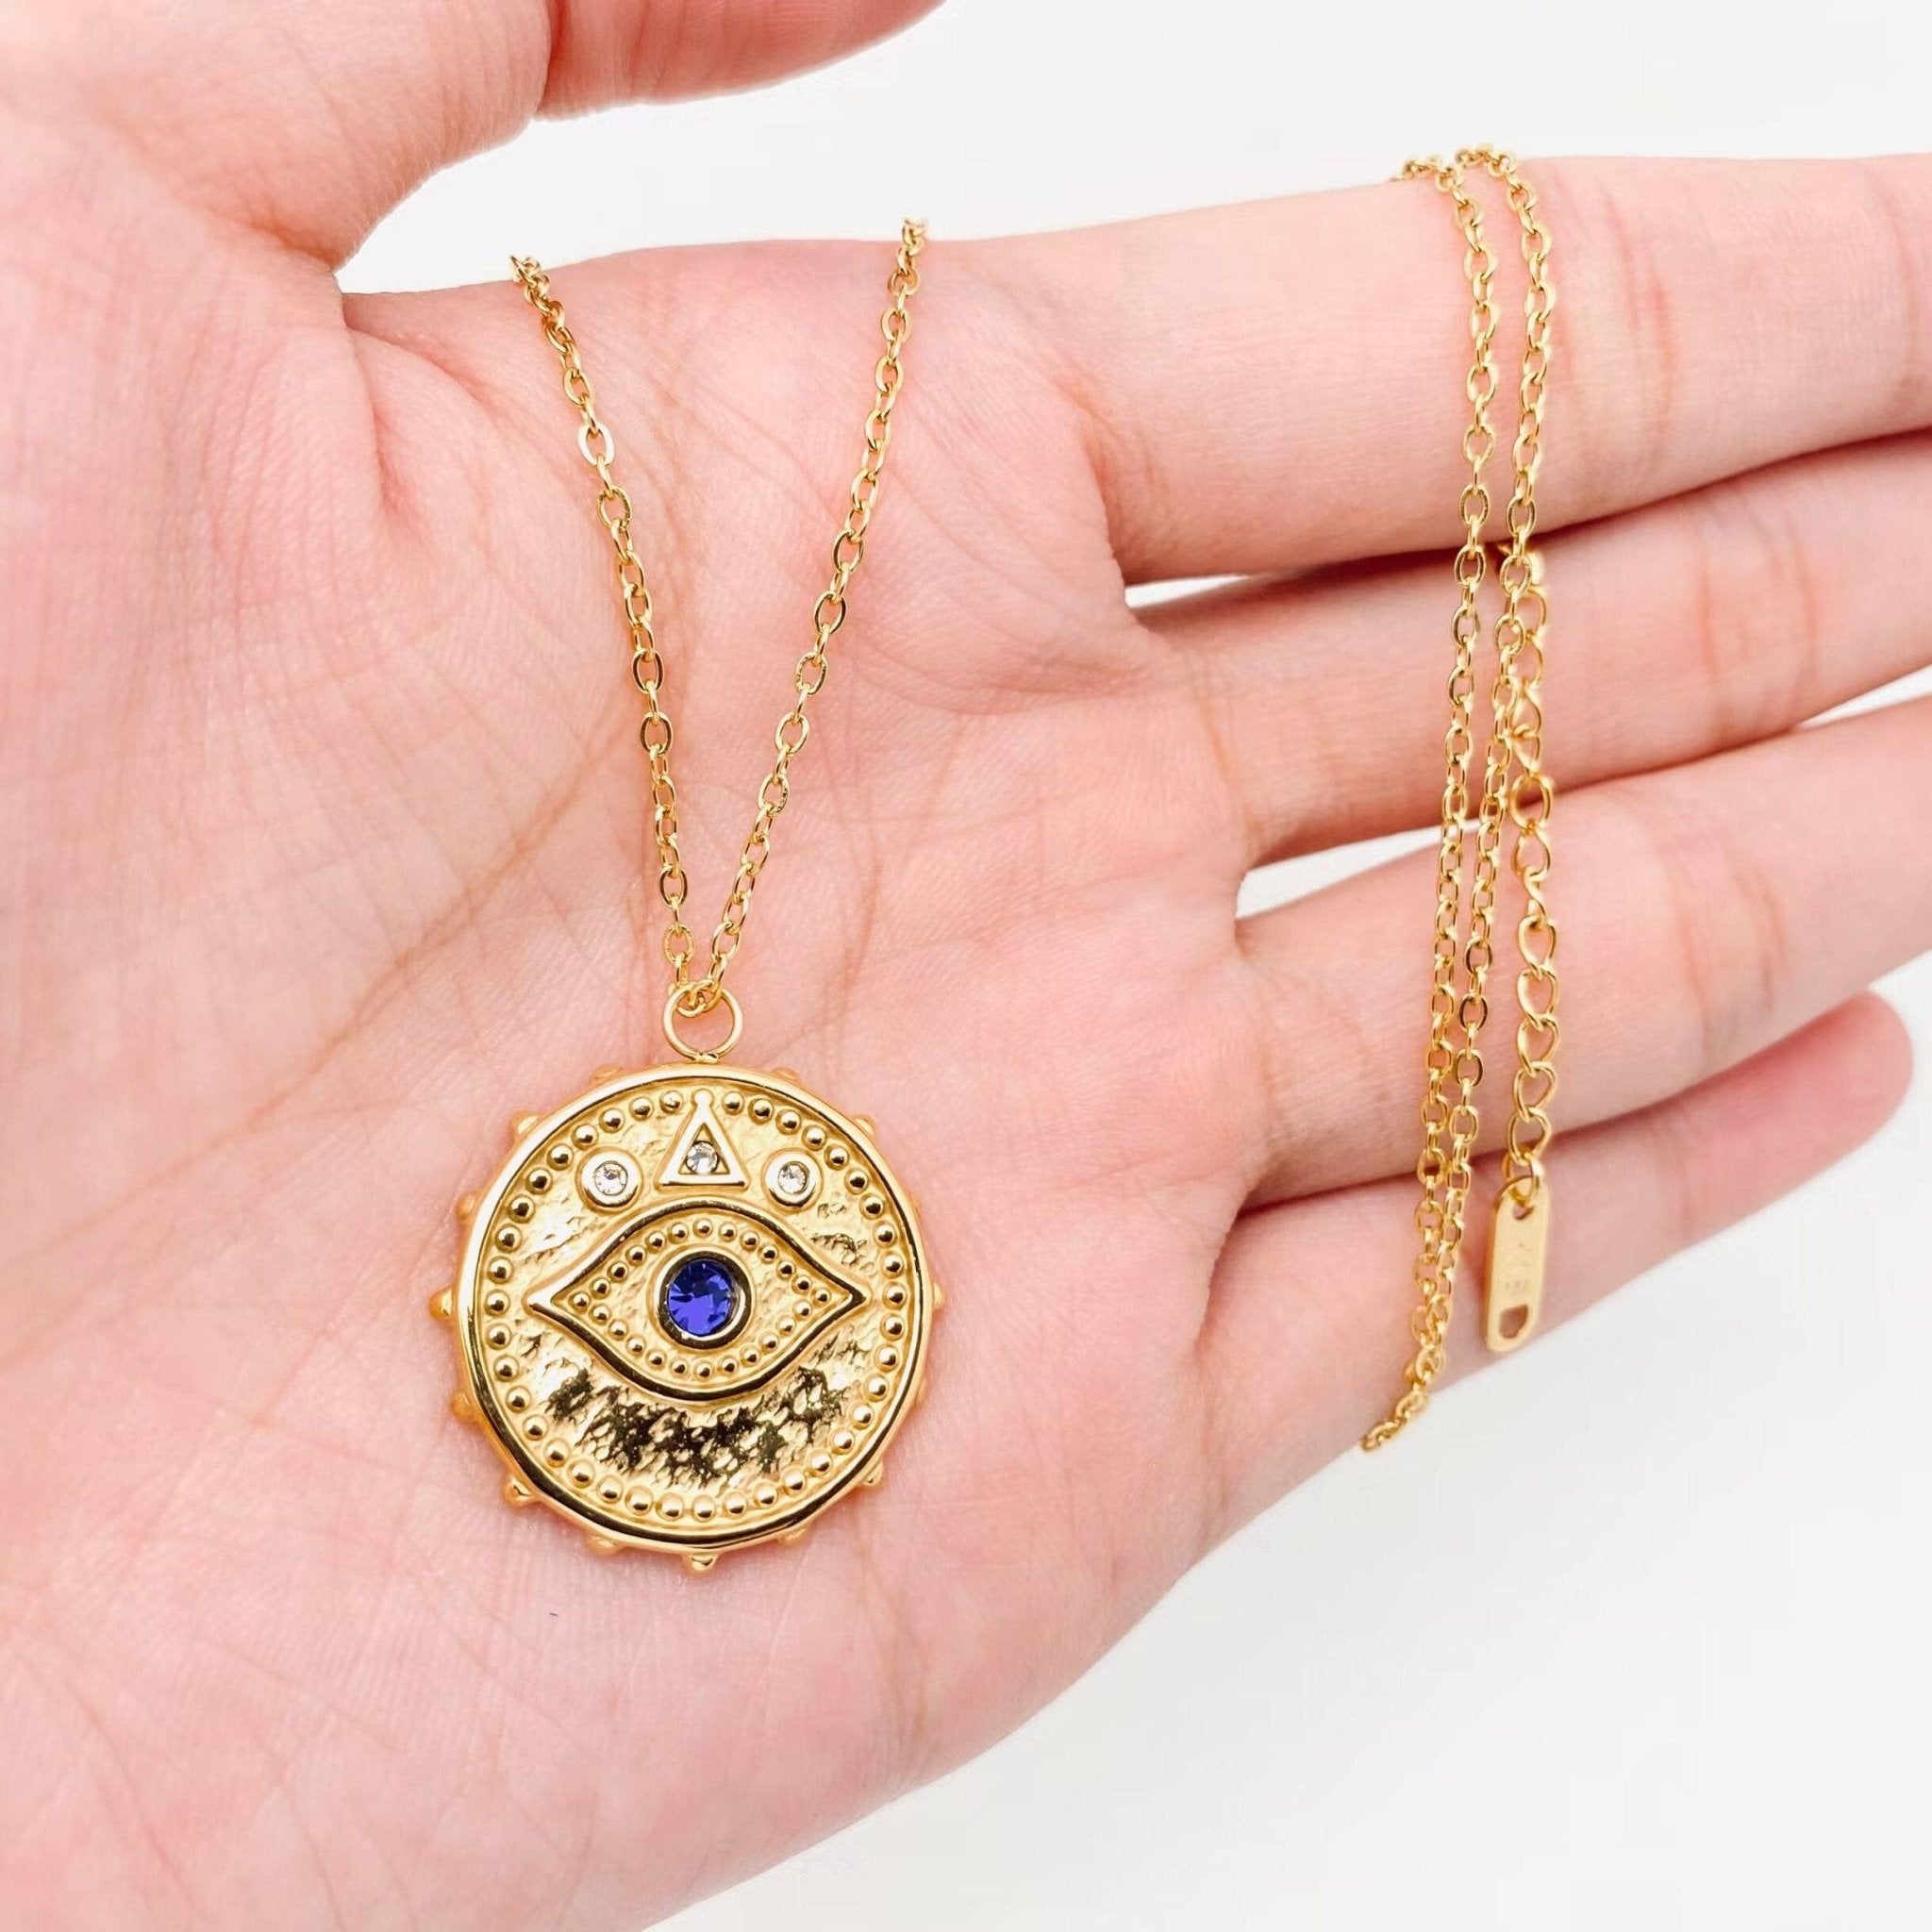 Embossed Blue Eye Charm Necklace - Spiral Circle